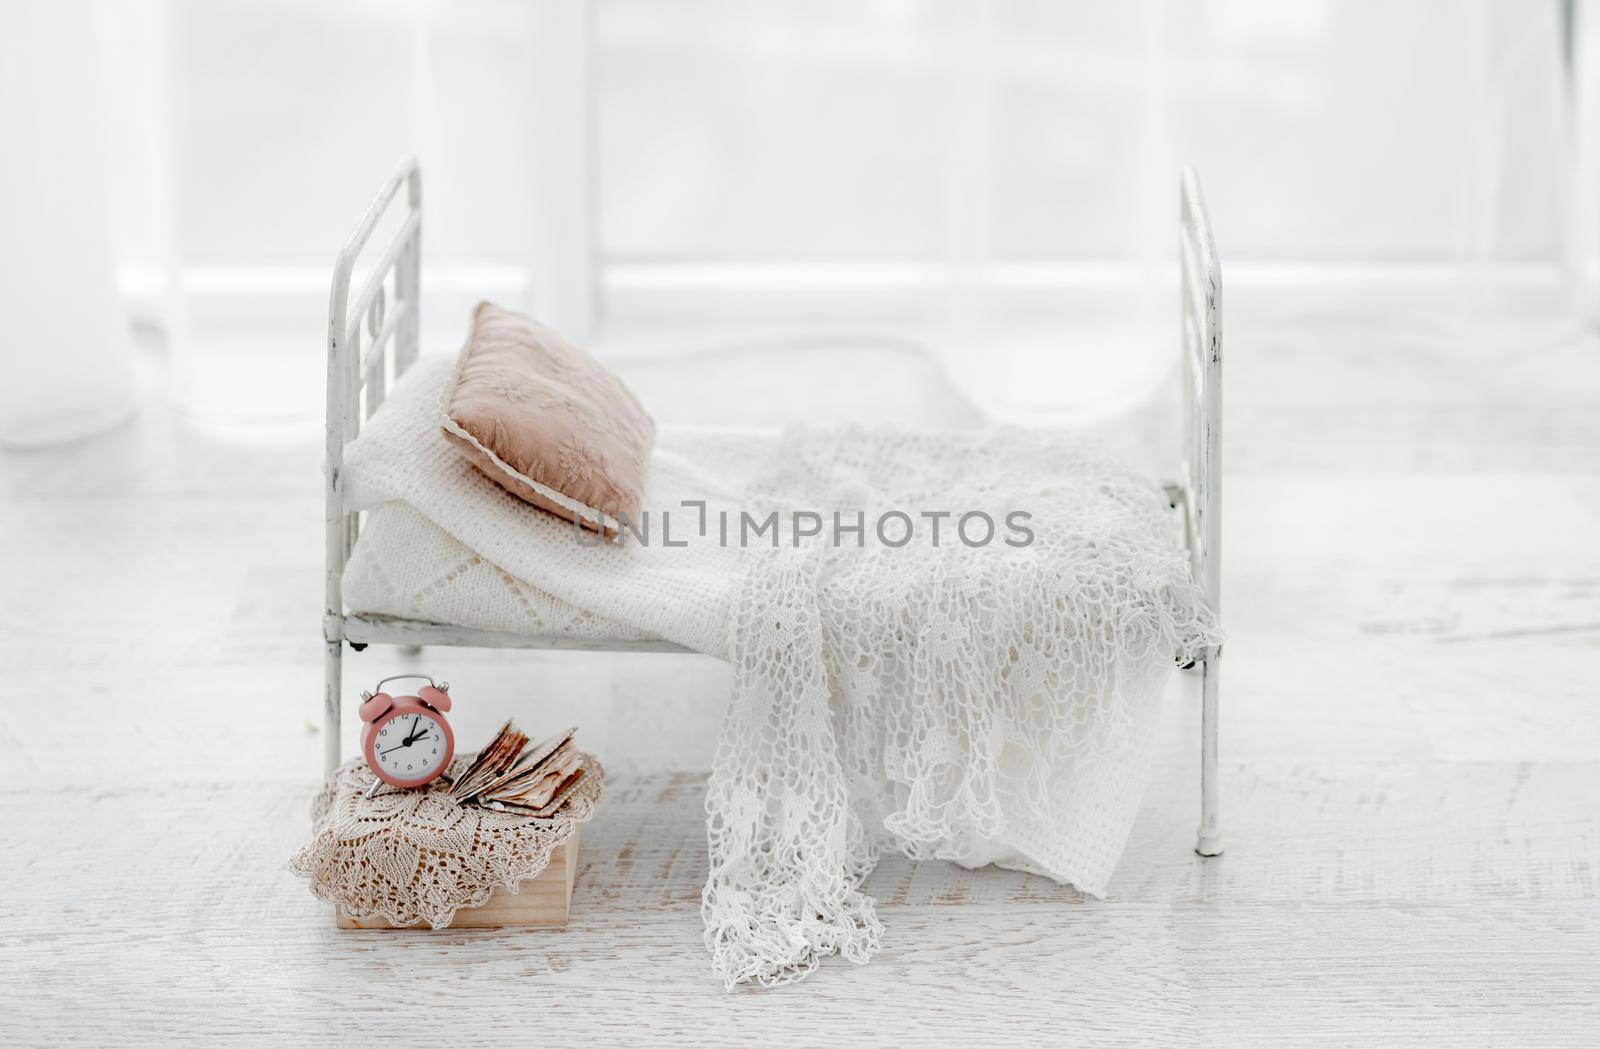 Background for newborn photosession by tan4ikk1